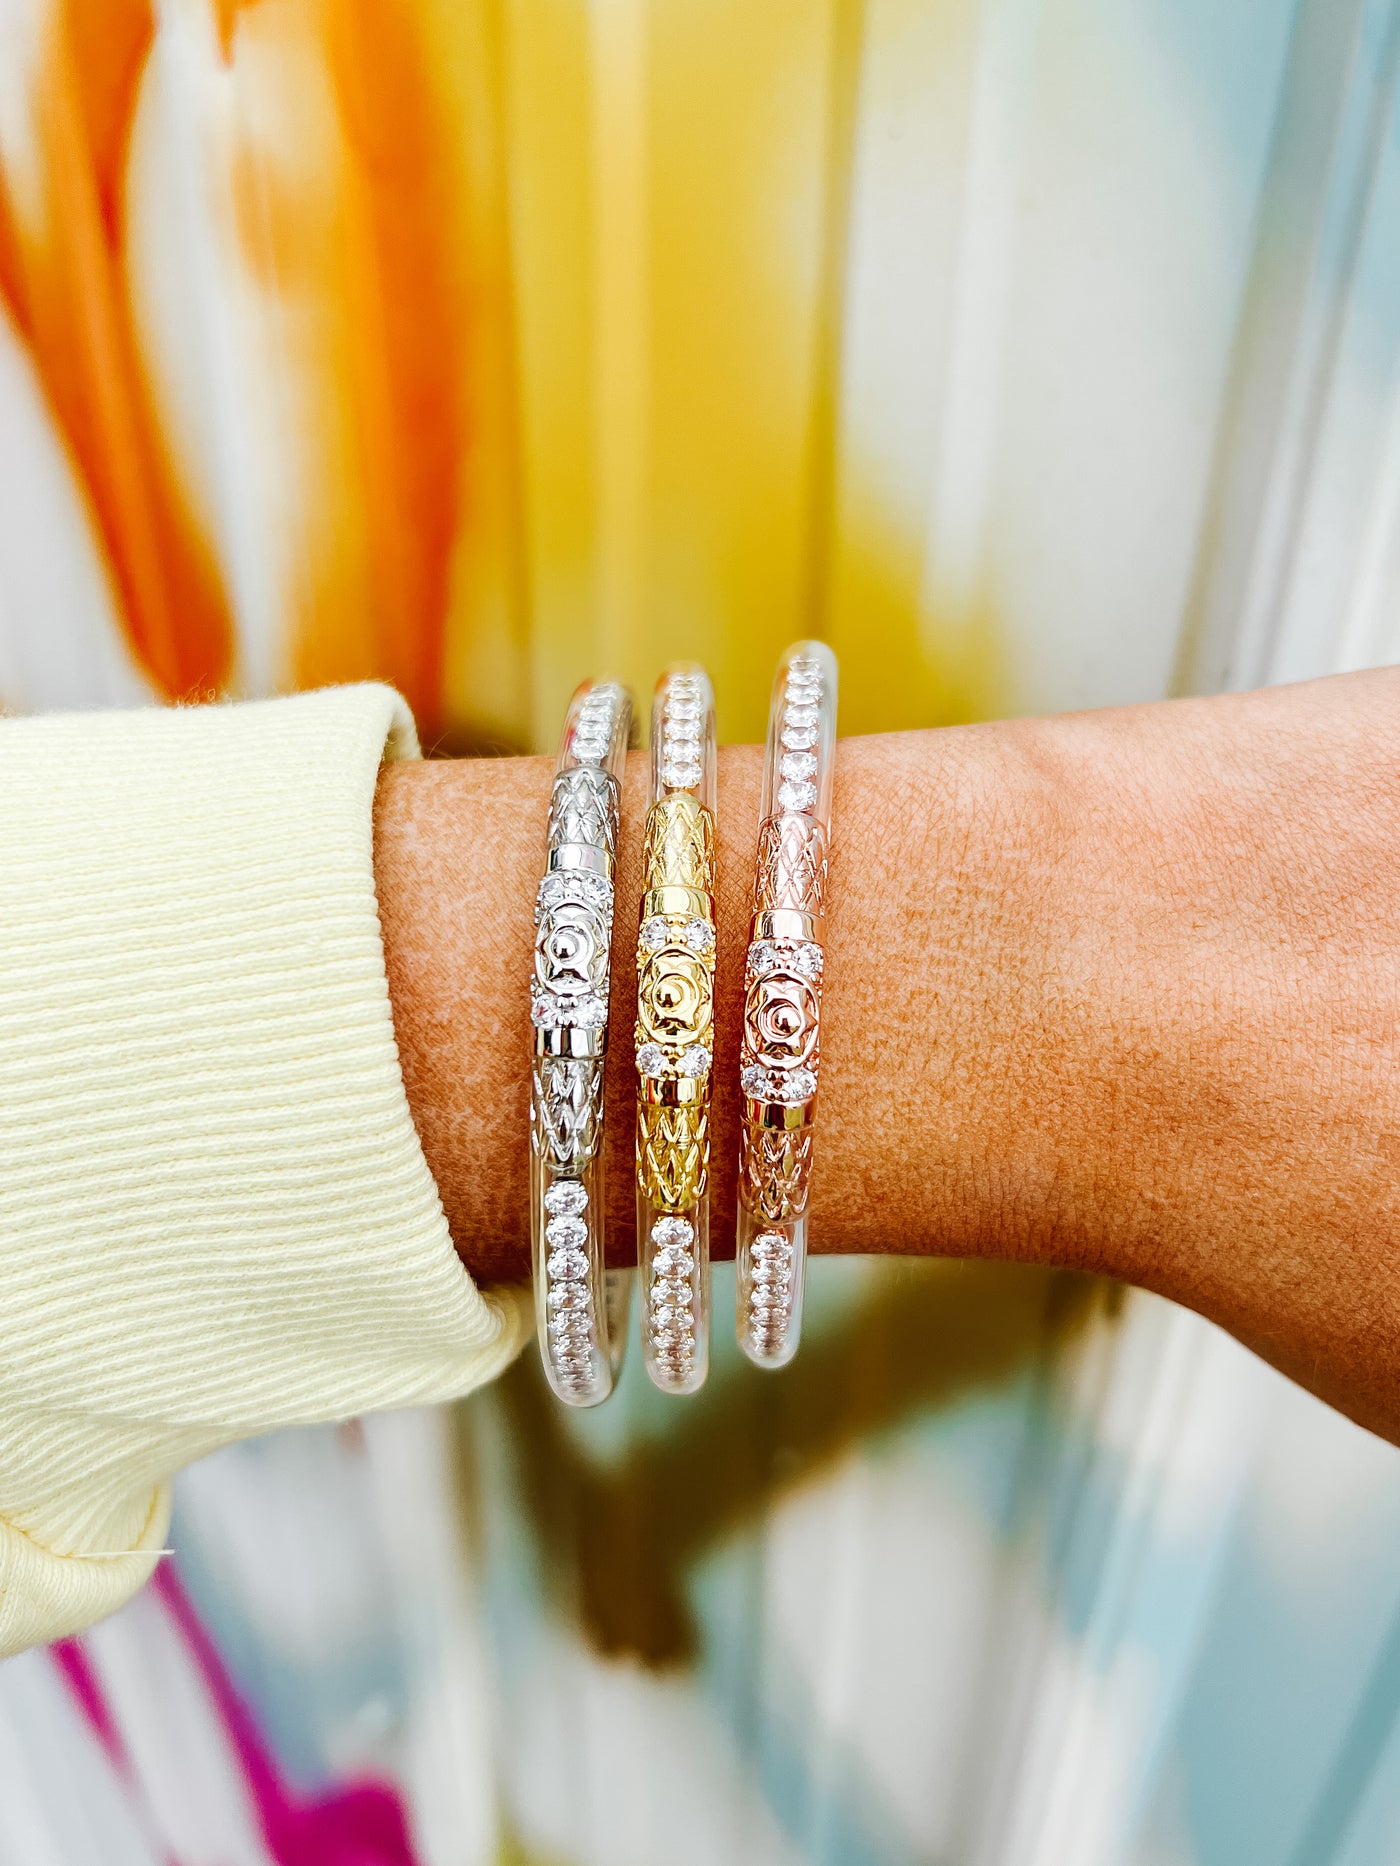 BuDhaGirl Three Queens All Weather Bangles - Clear Crystal